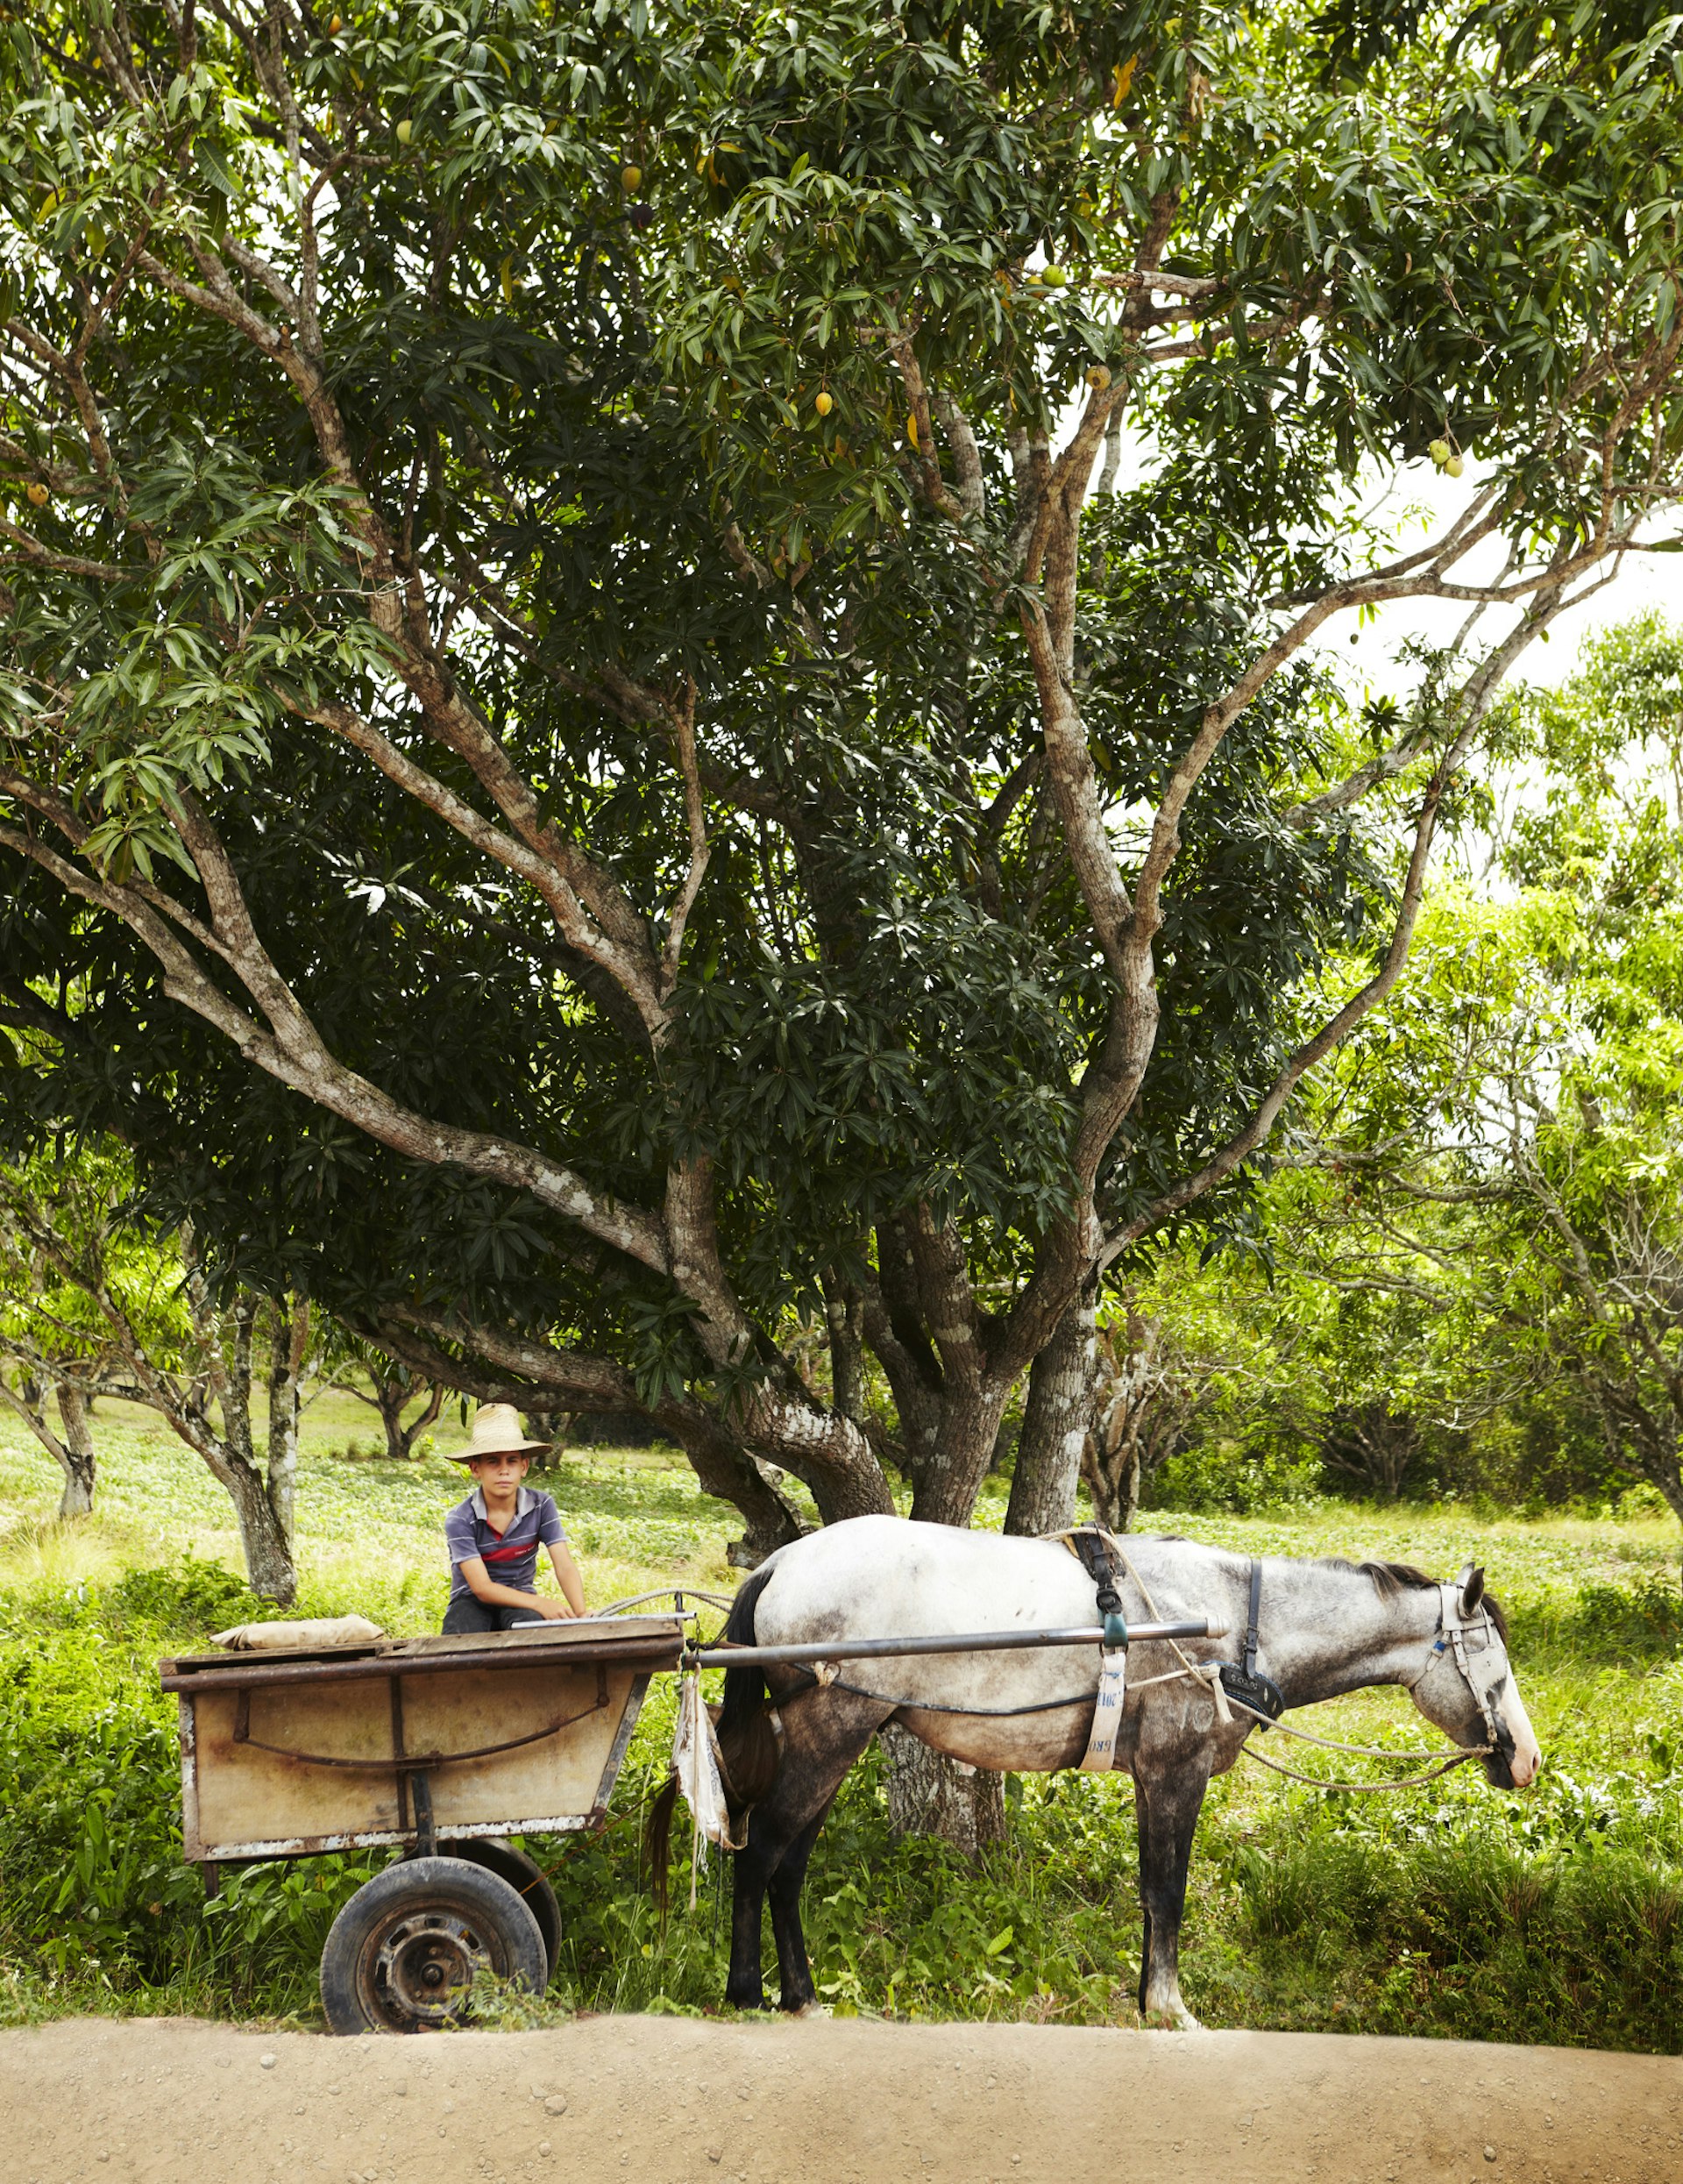 Horse and cart, Vinales, Cuba © Mark Read / Lonely Planet